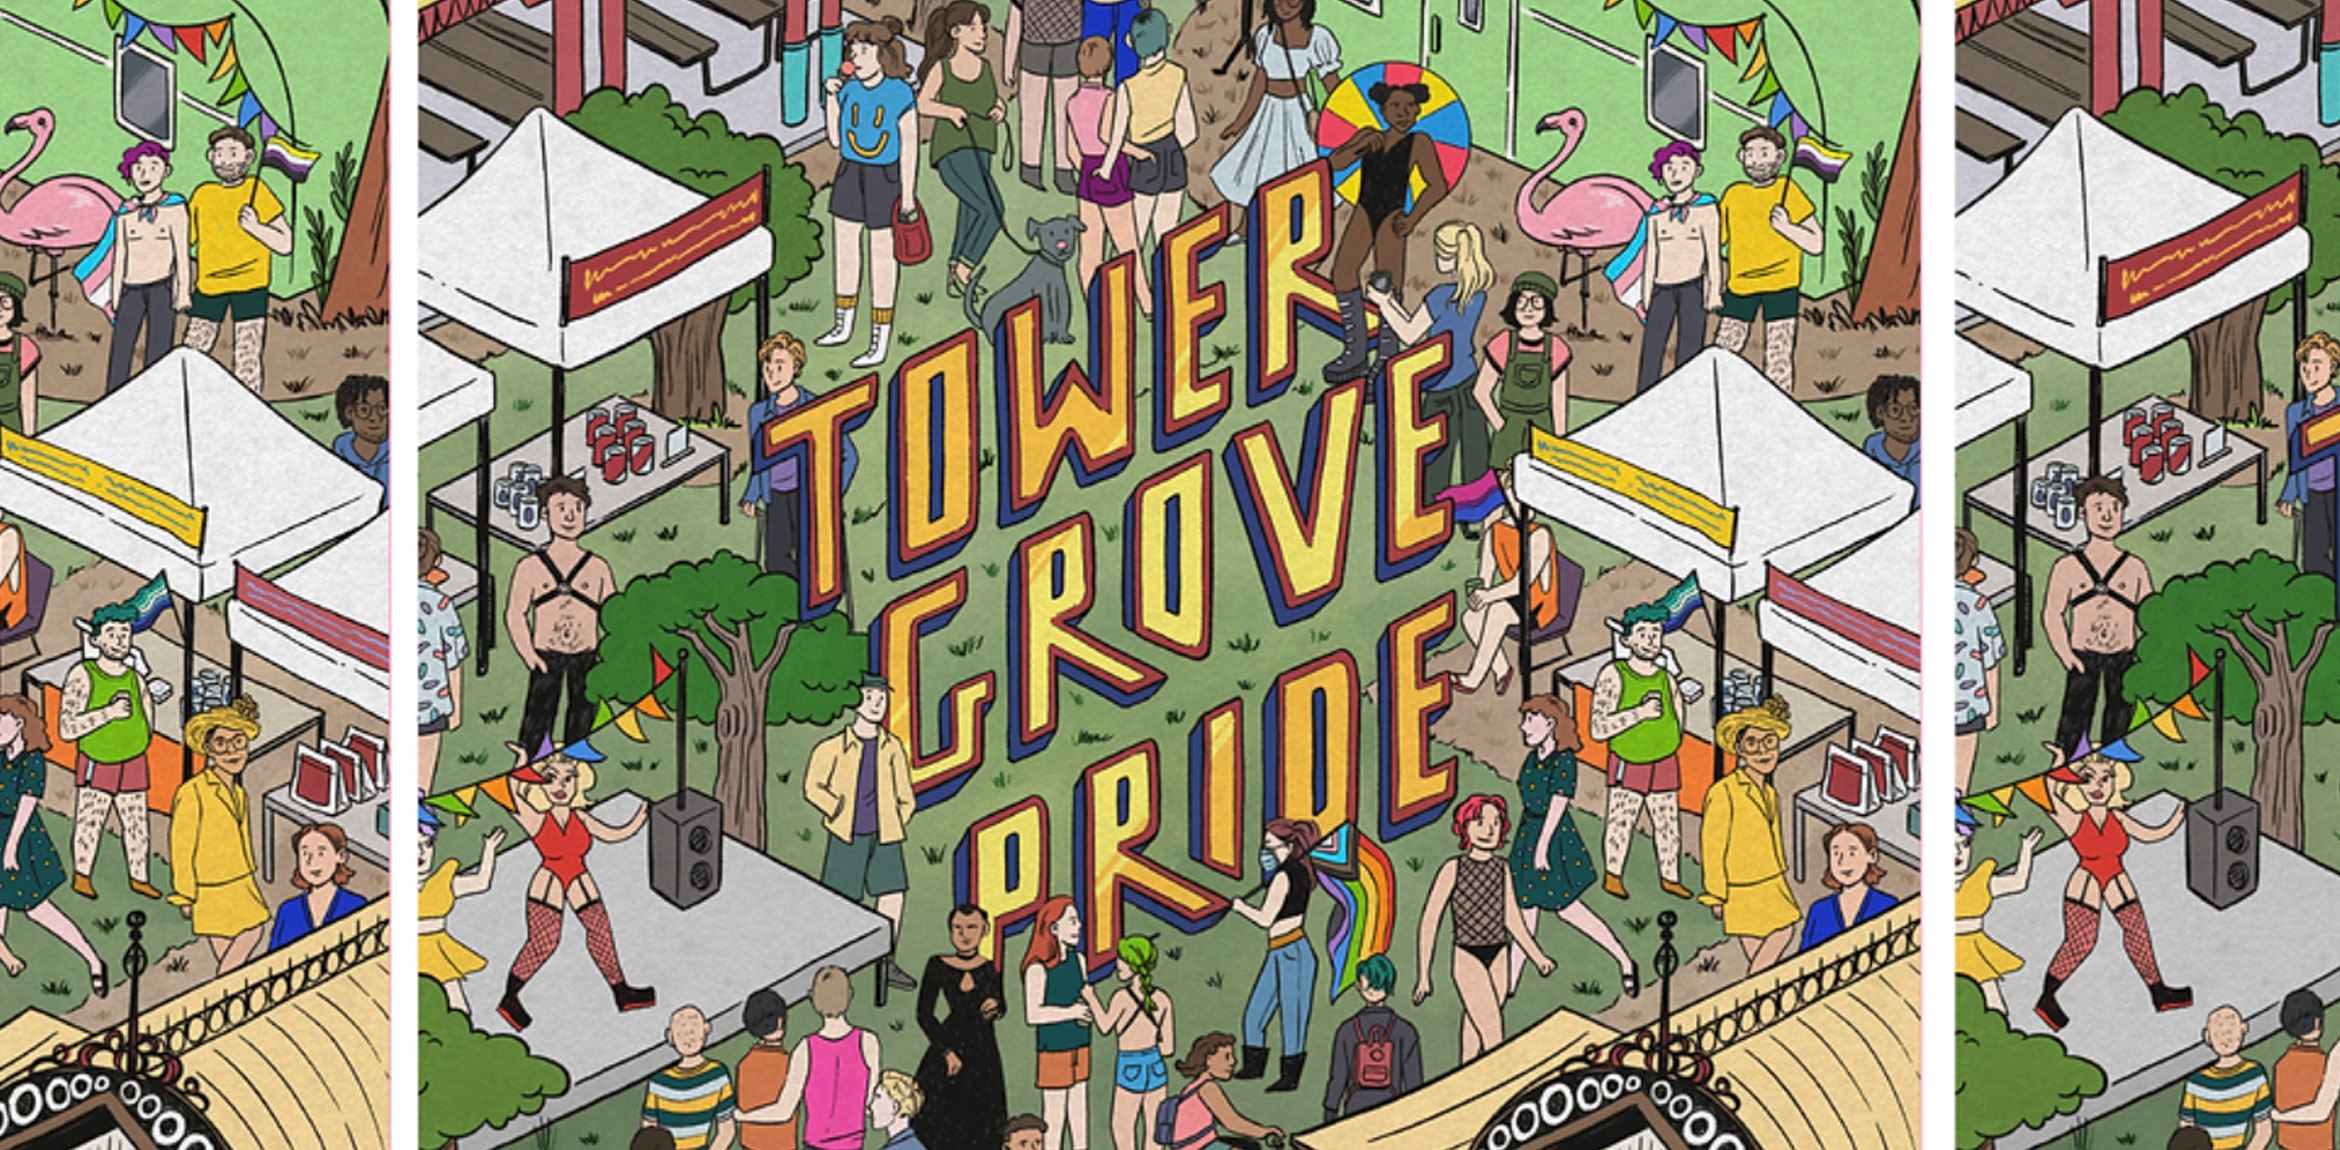 A stylized illustration of a top view of tower grove during pride with crowds and booths